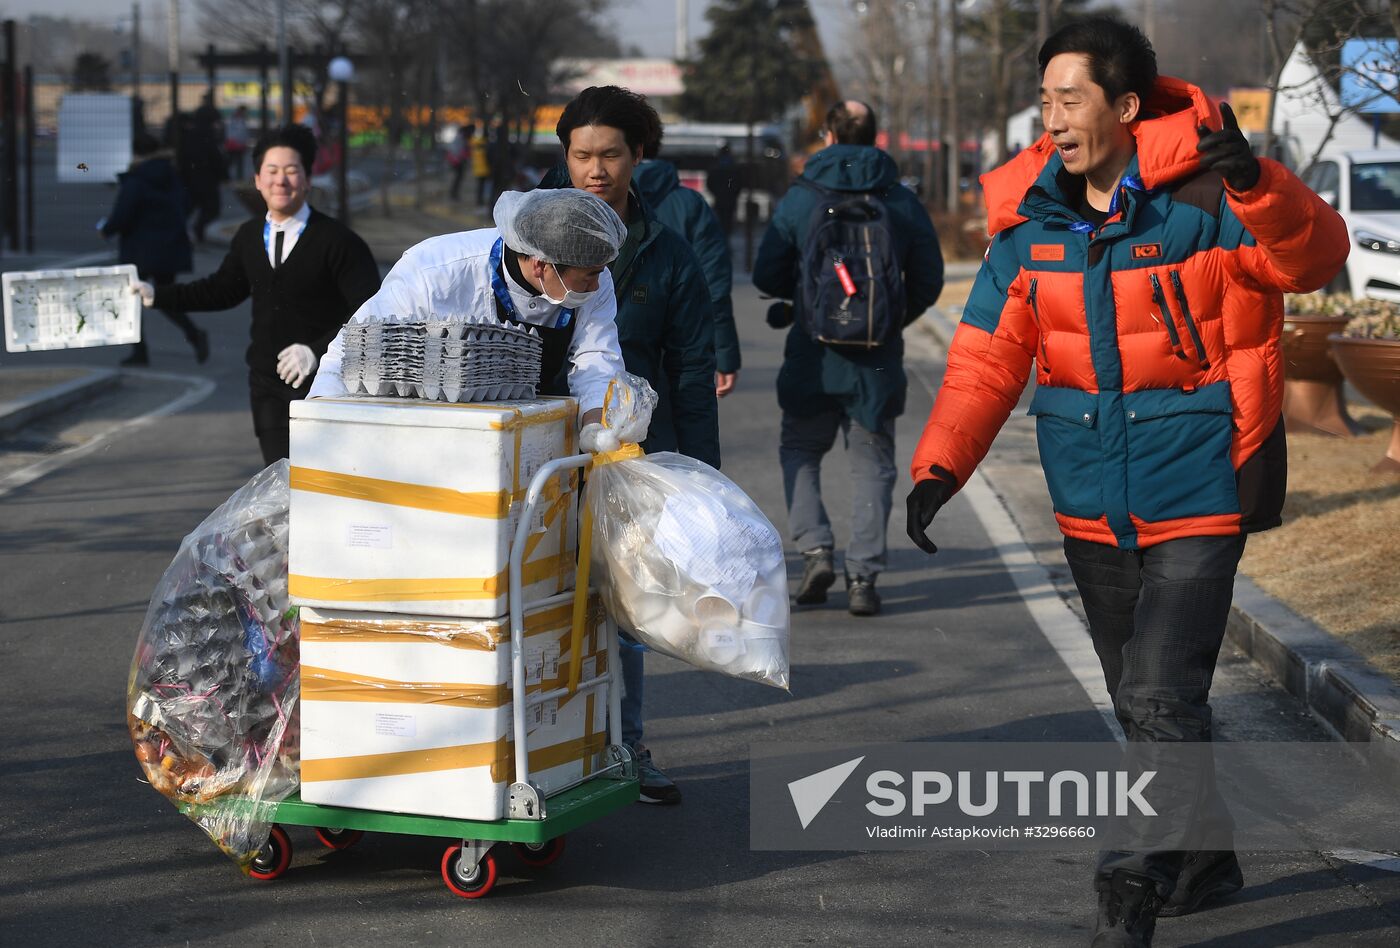 Strong wind prompts evacuation from press center in Pyeongchang Olympic Village